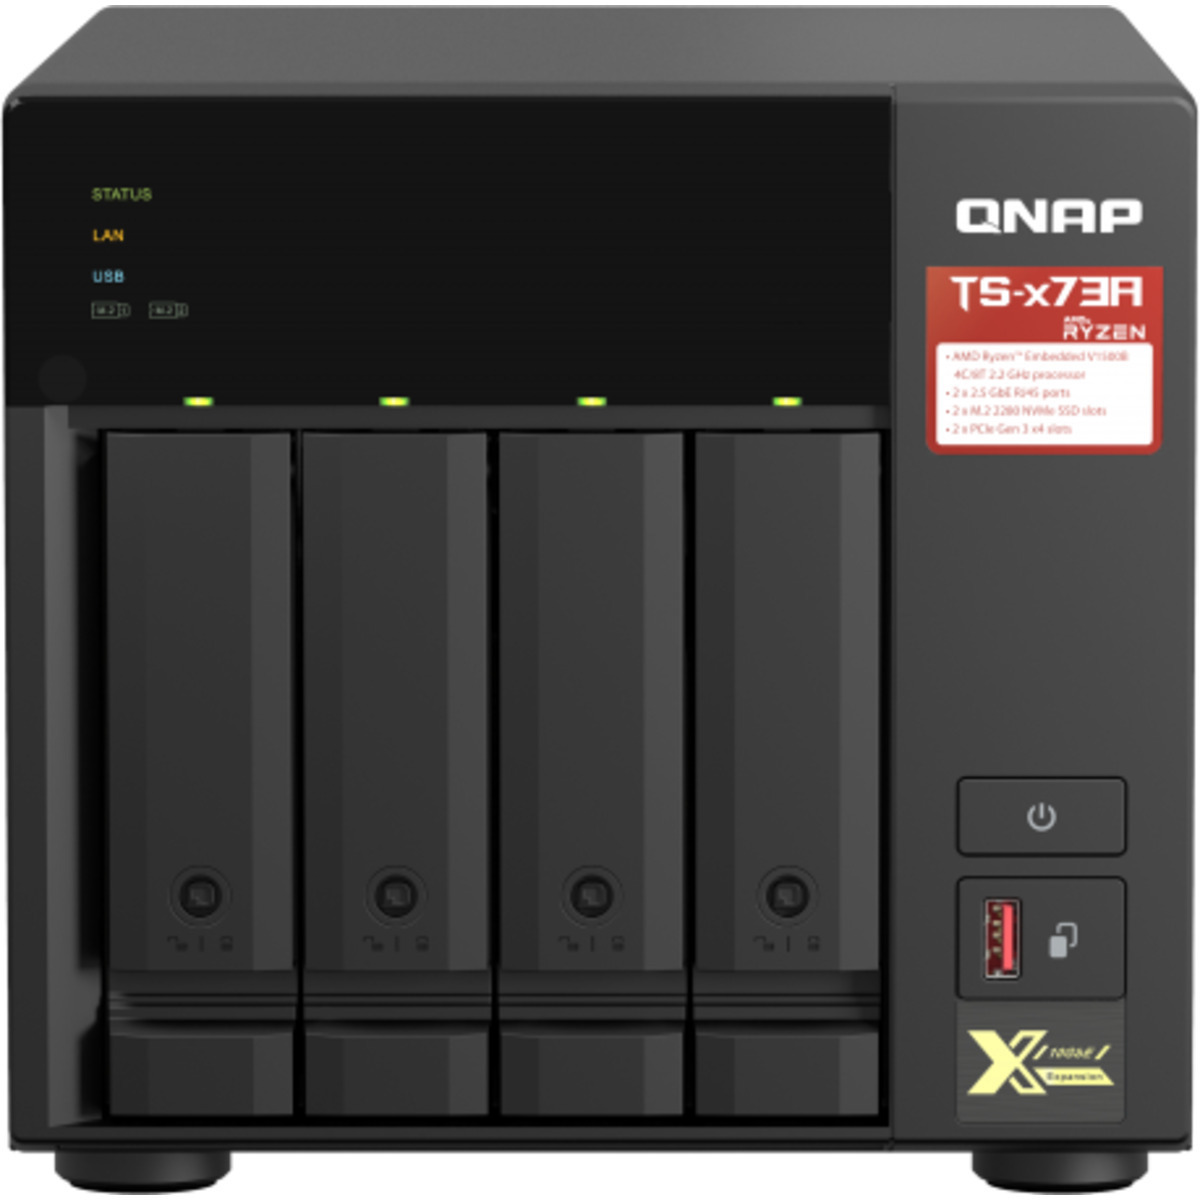 buy $2744 QNAP TS-473A 72tb Desktop NAS - Network Attached Storage Device 4x18000gb Toshiba Enterprise Capacity MG09ACA18TE 3.5 7200rpm SATA 6Gb/s HDD ENTERPRISE Class Drives Installed - Burn-In Tested - nas headquarters buy network attached storage server device das new raid-5 free shipping usa christmas new year holiday sale TS-473A